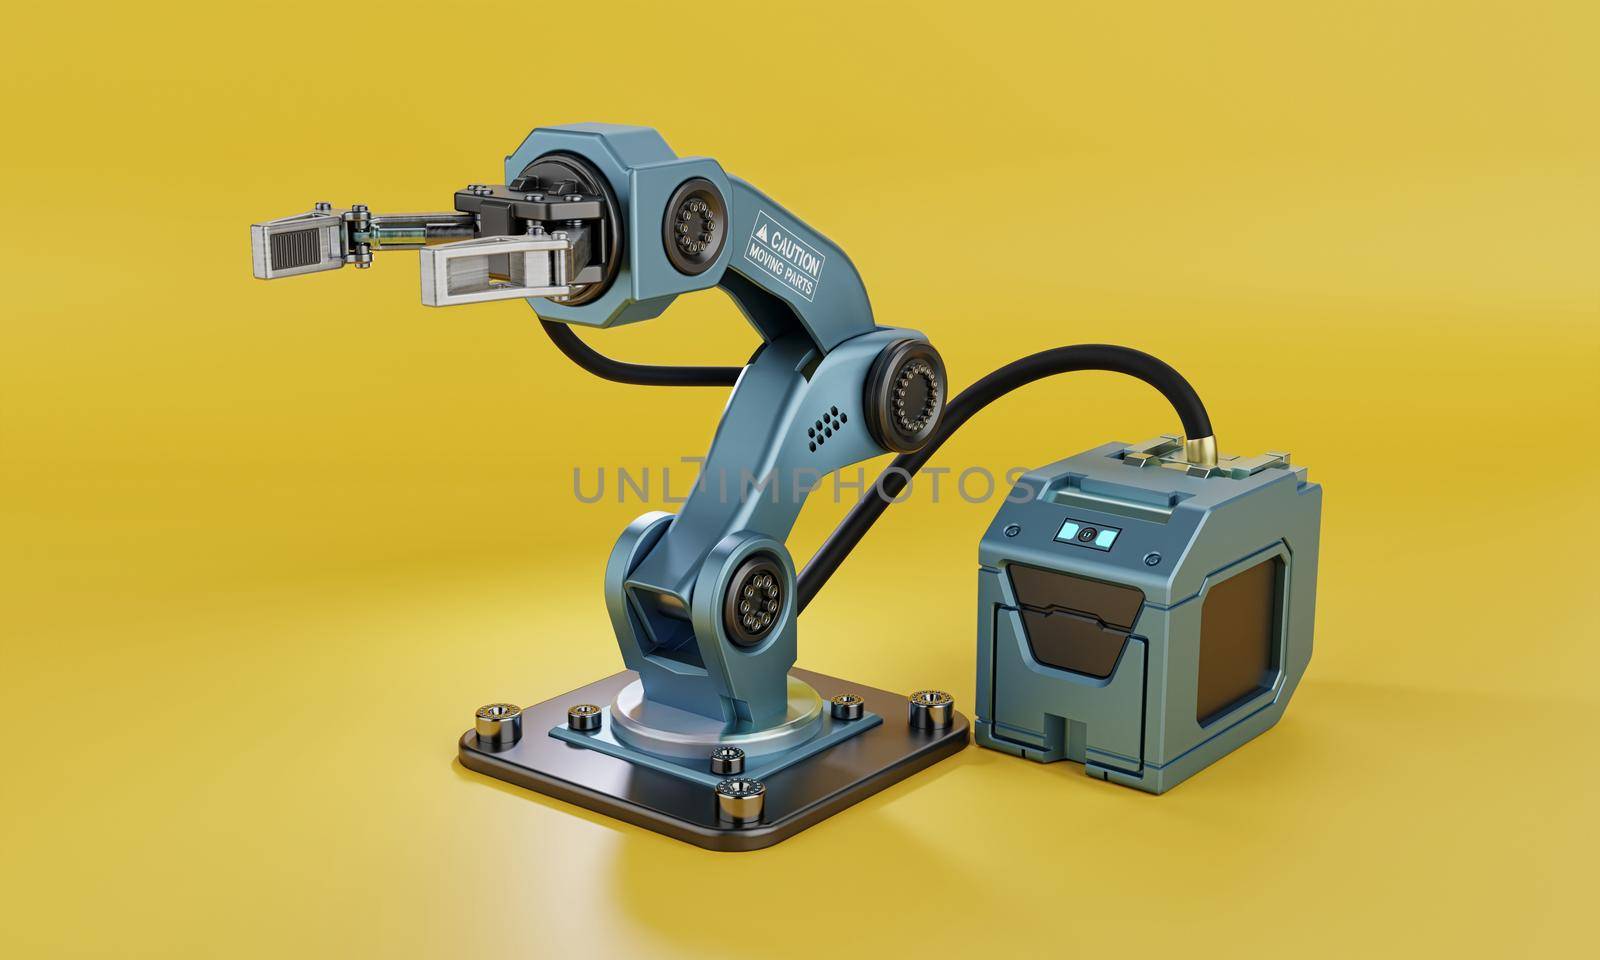 Robot arm with hand grip and power supply for manufacturing industrial plant on yellow background. Technology and Futuristic concept. Artificial intelligence and Iot. 3D illustration rendering